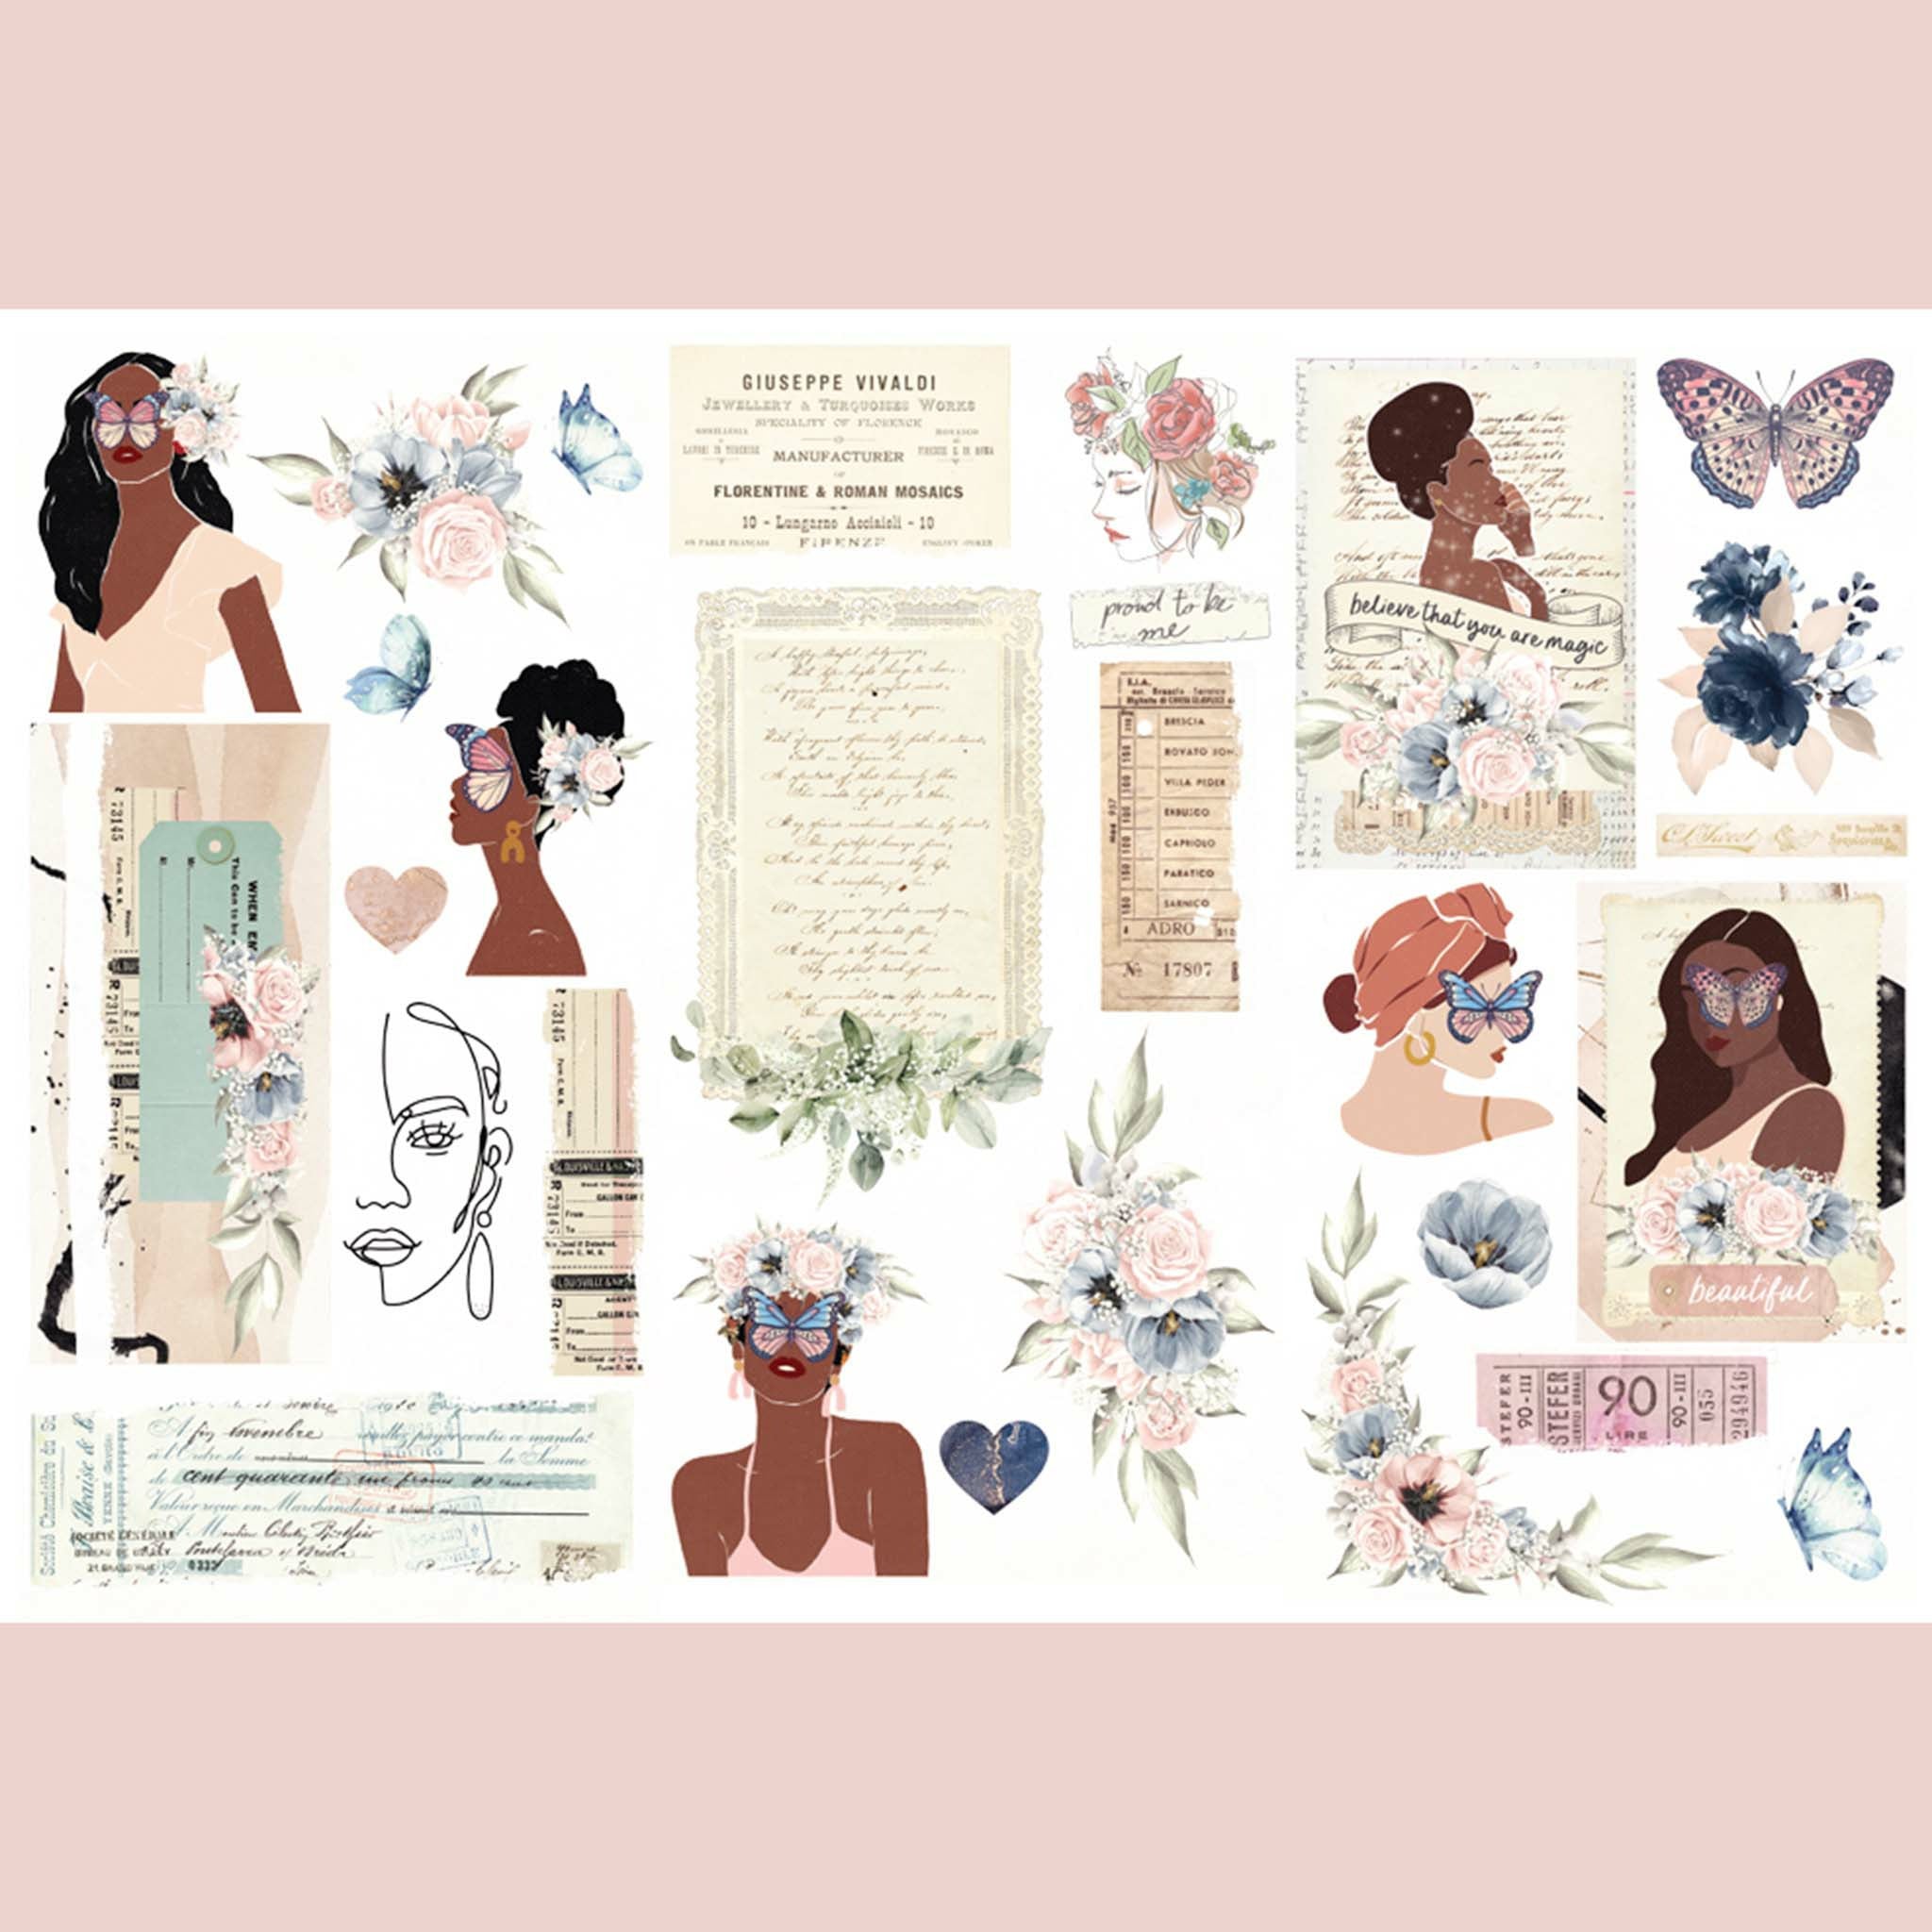 Multiple small transfer designs featuring women of color, butterflies, and vintage notes. Pink borders on the top and bottom.